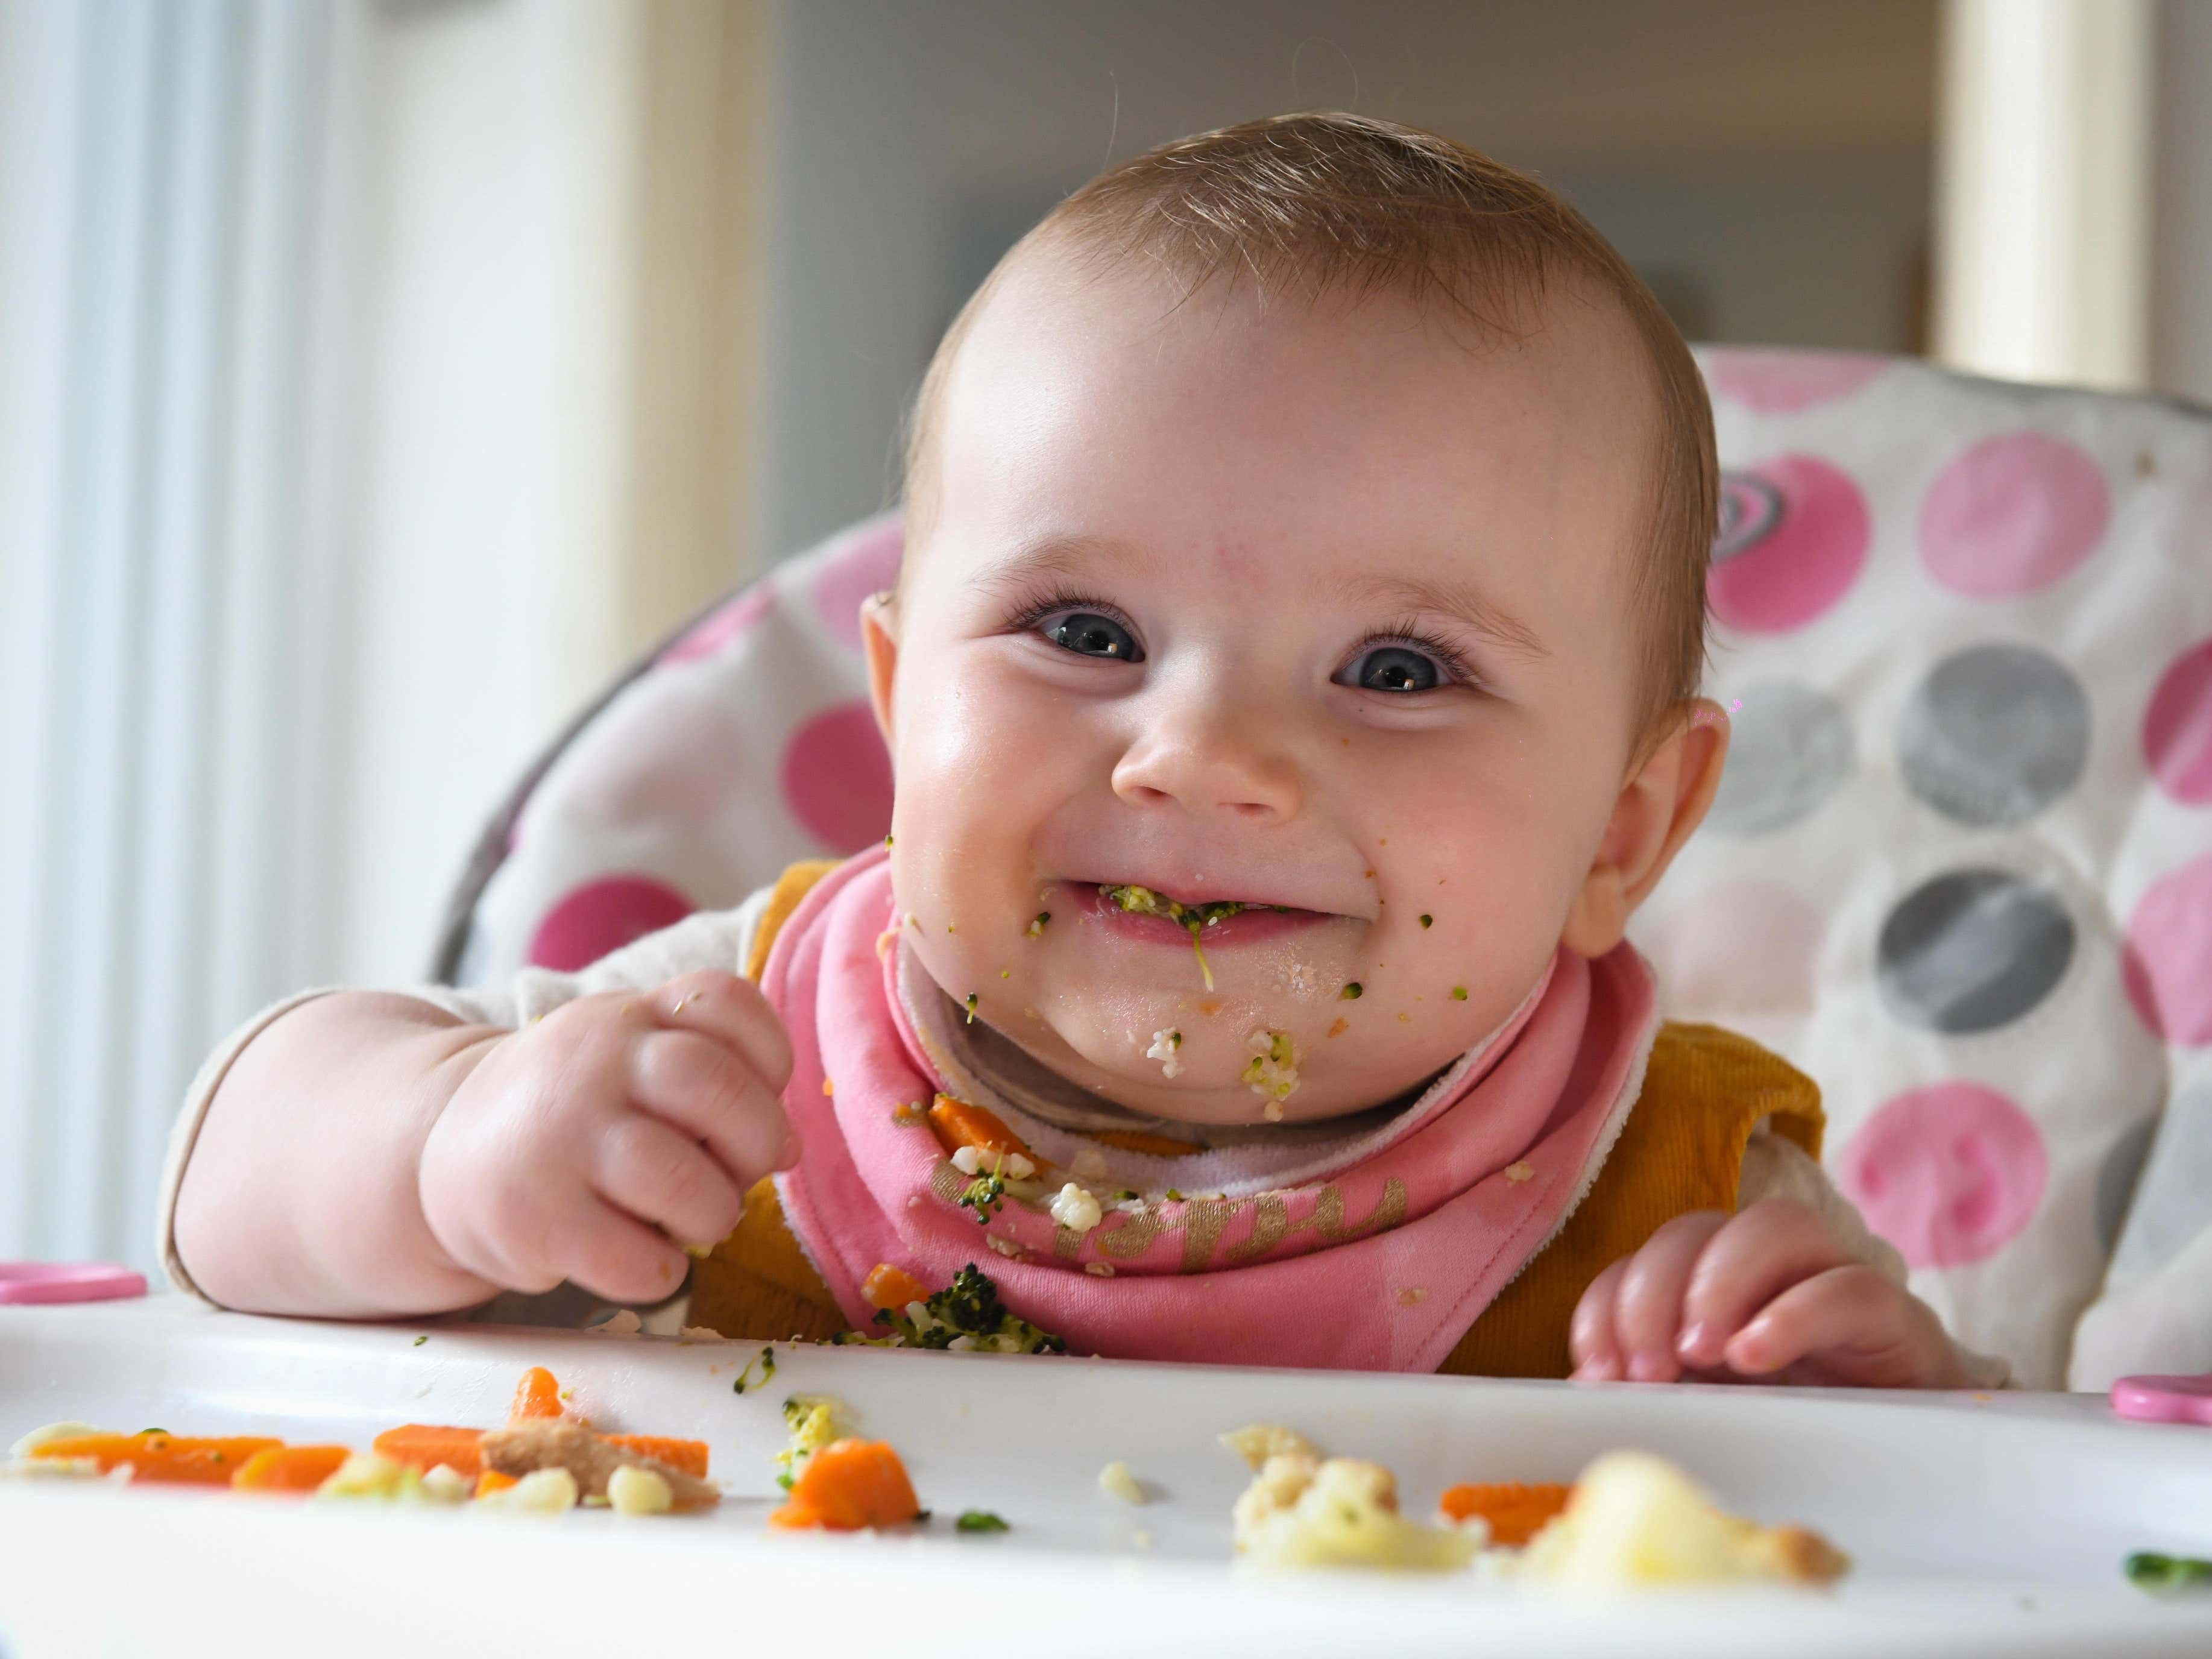 Baby-led weaning ‘provides ample nutrients to support growth and development’